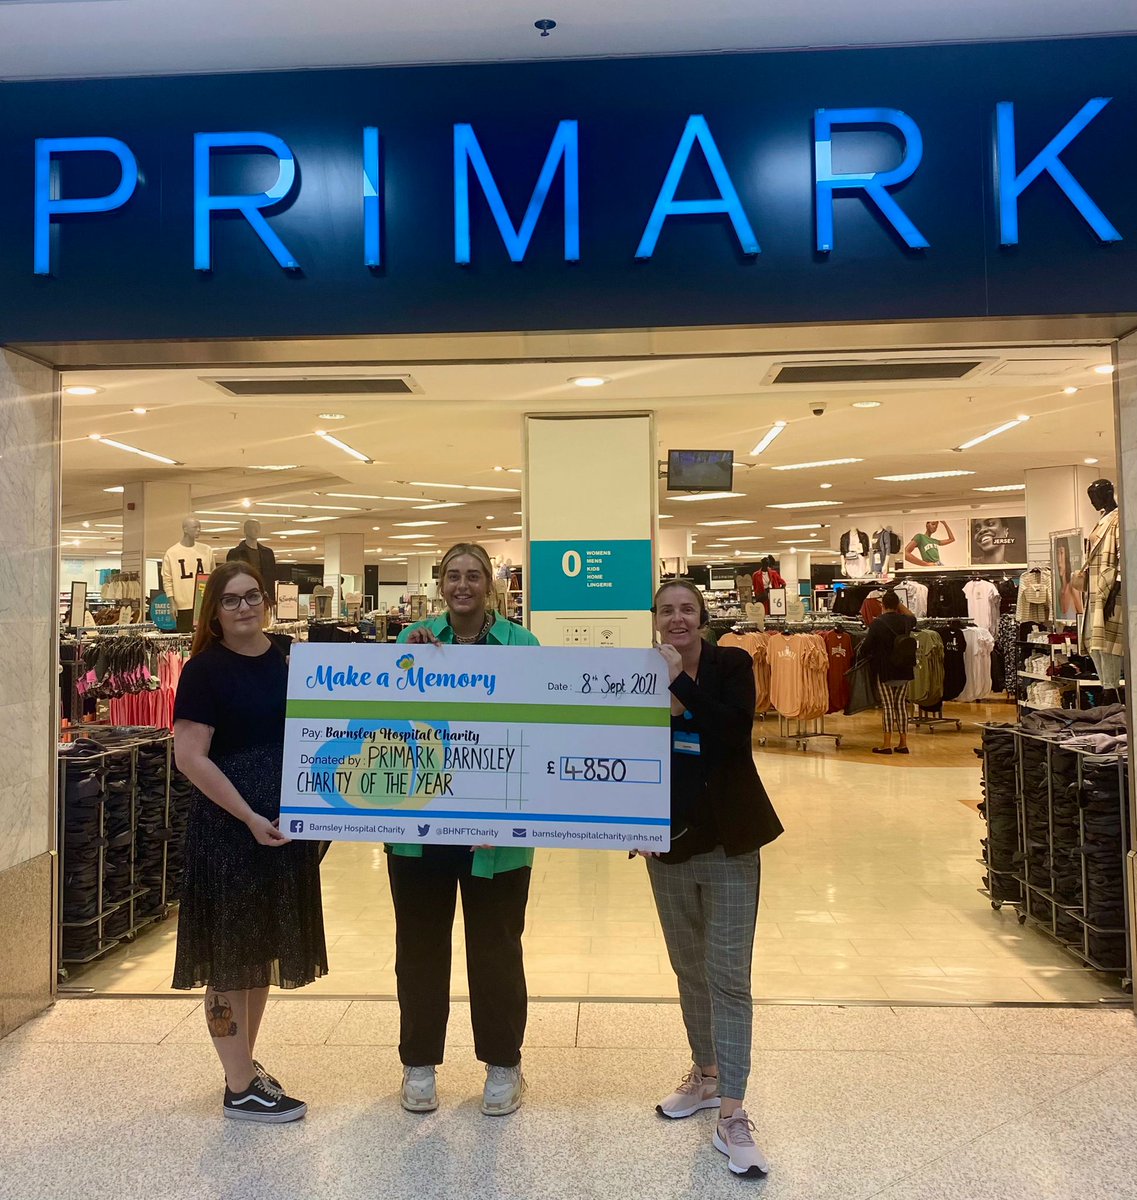 It was a real privilege for us to be @Primark 'Charity of the Year' The Barnsley team 'checked out' with a phenomenal £4,850 for our Make A Memory Appeal. They worked so hard and came up with some fantastic ideas. Thank you - top of the shops! 🏆